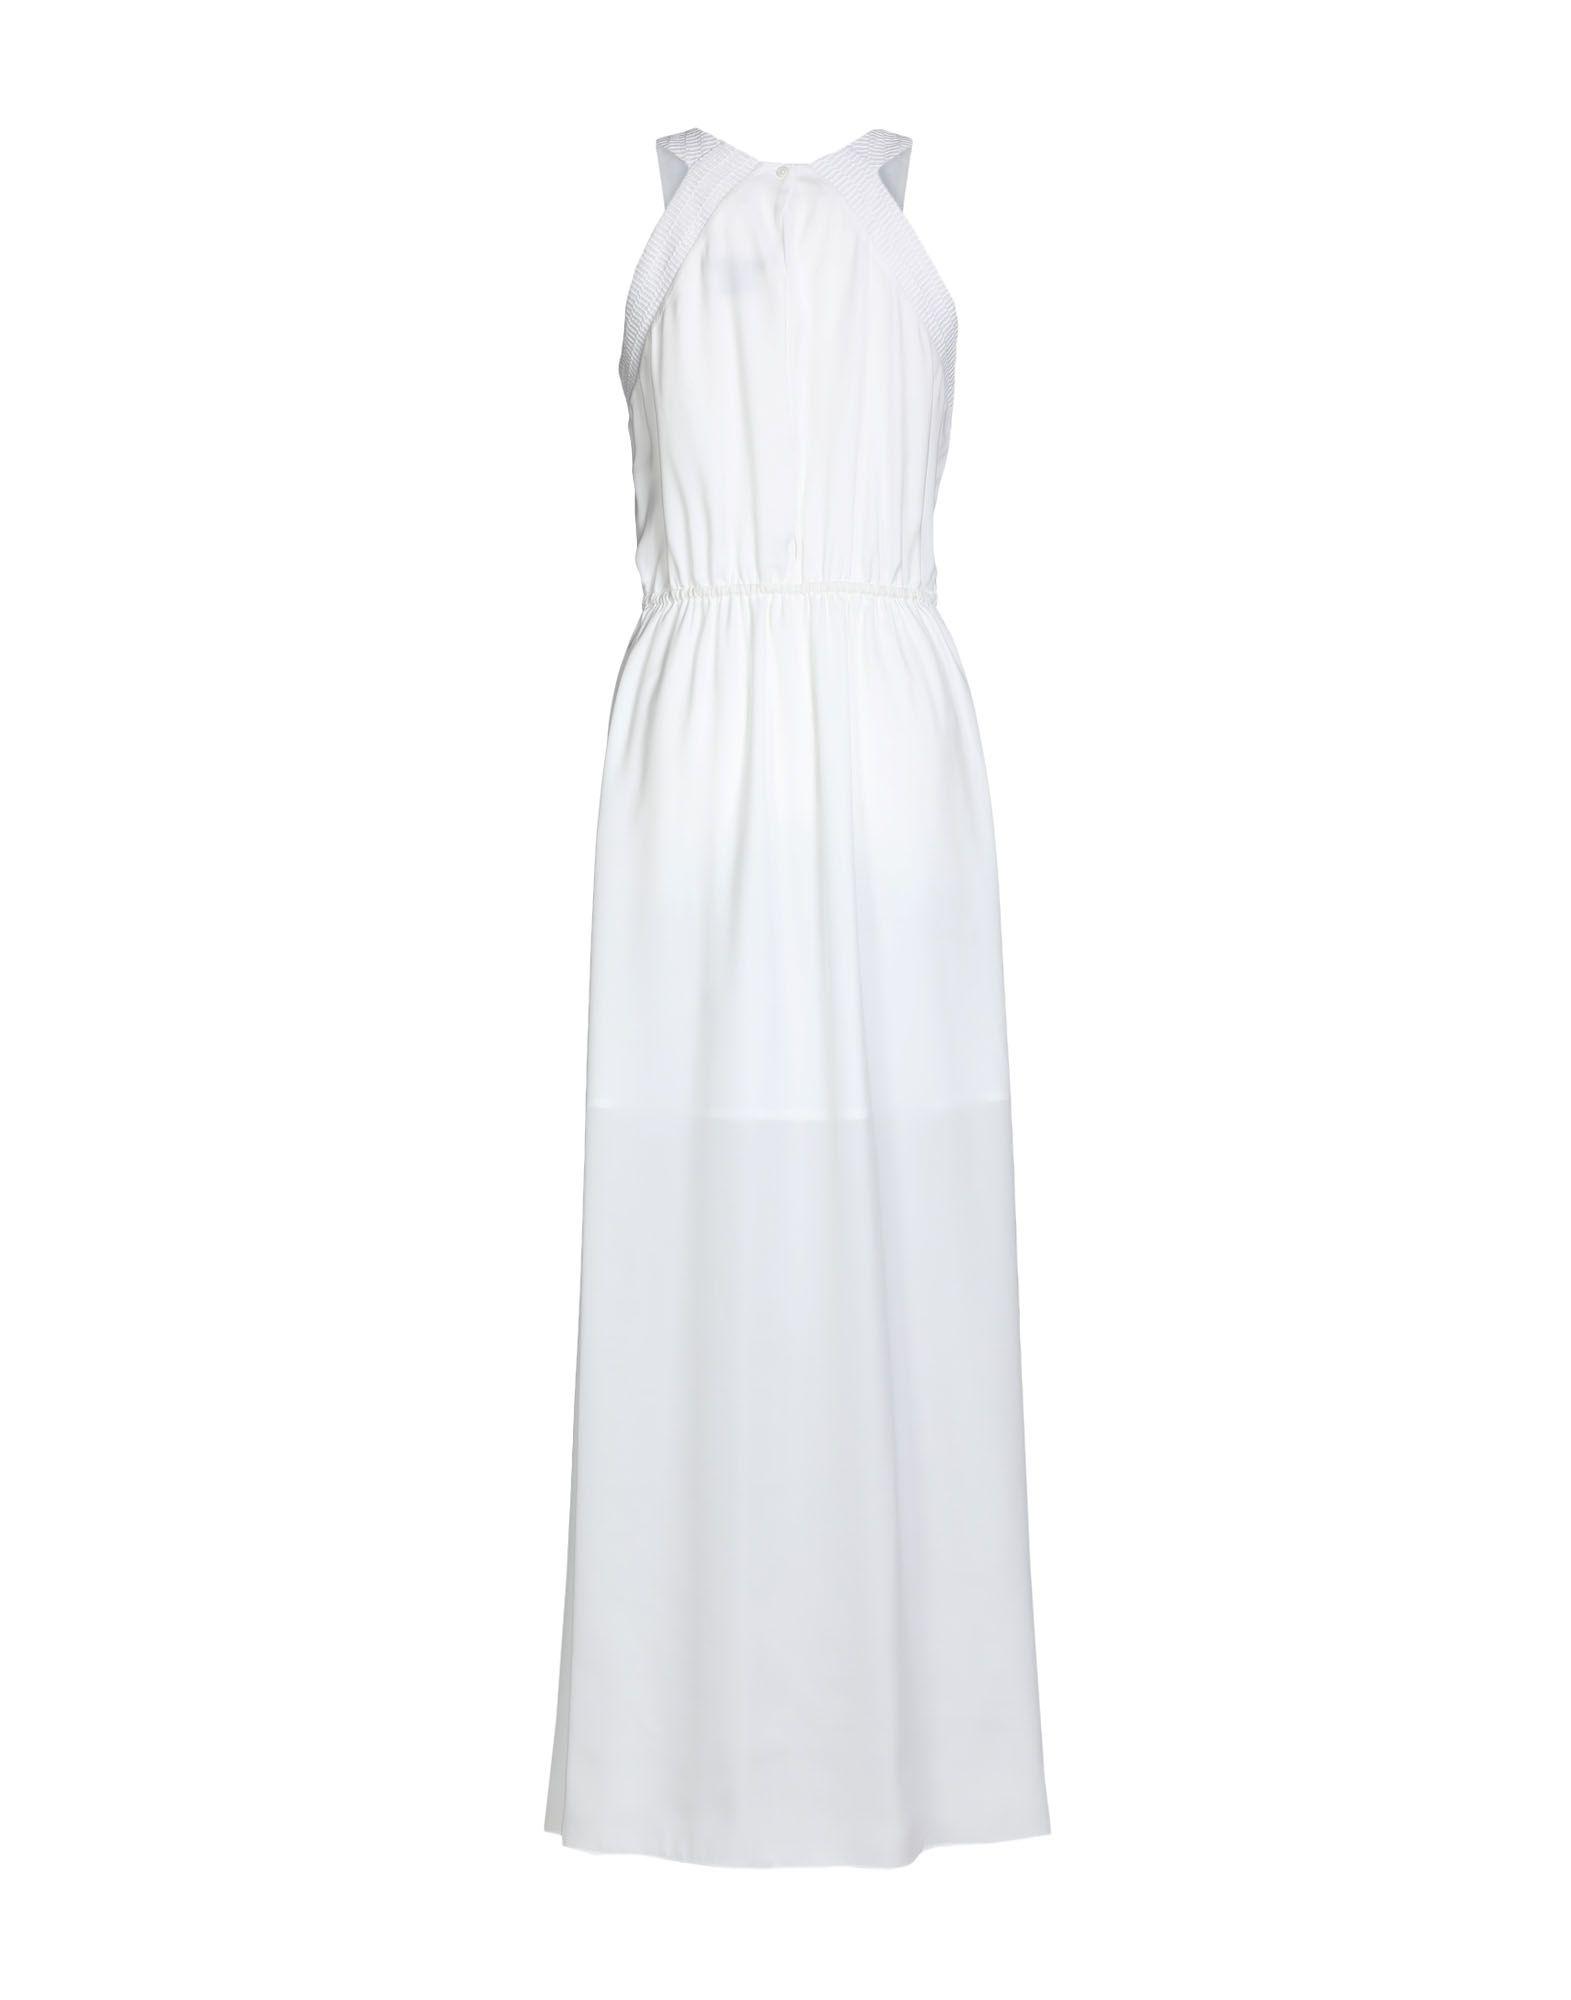 Armani Exchange Synthetic Long Dress in White - Lyst